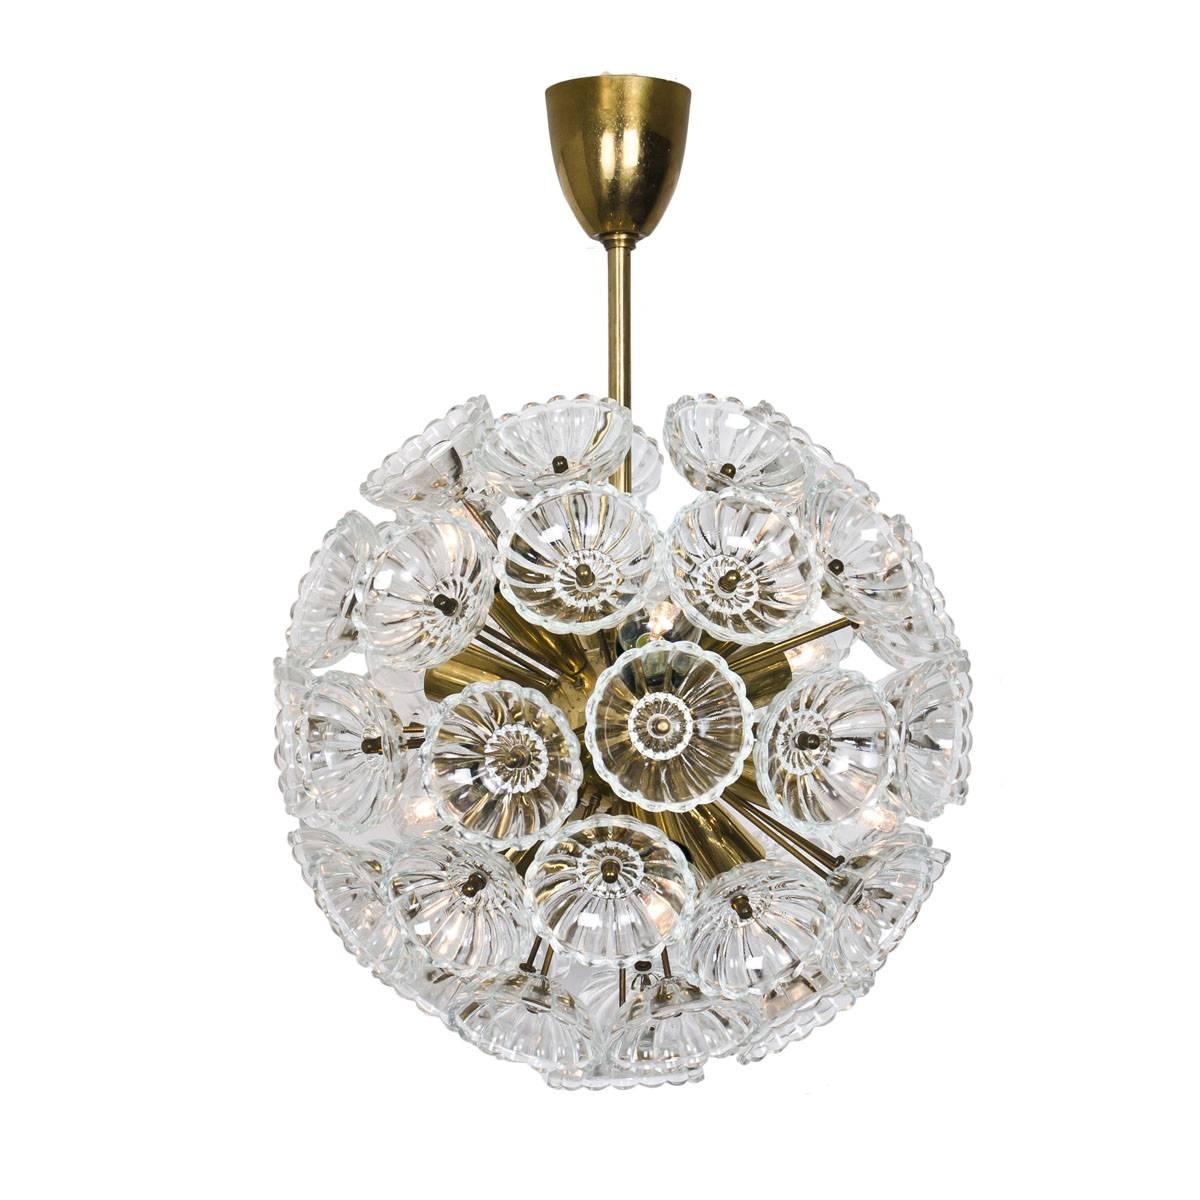 Set of Five Starburst Flower Sputniks, Two Wall Lights and Three Chandeliers For Sale 2